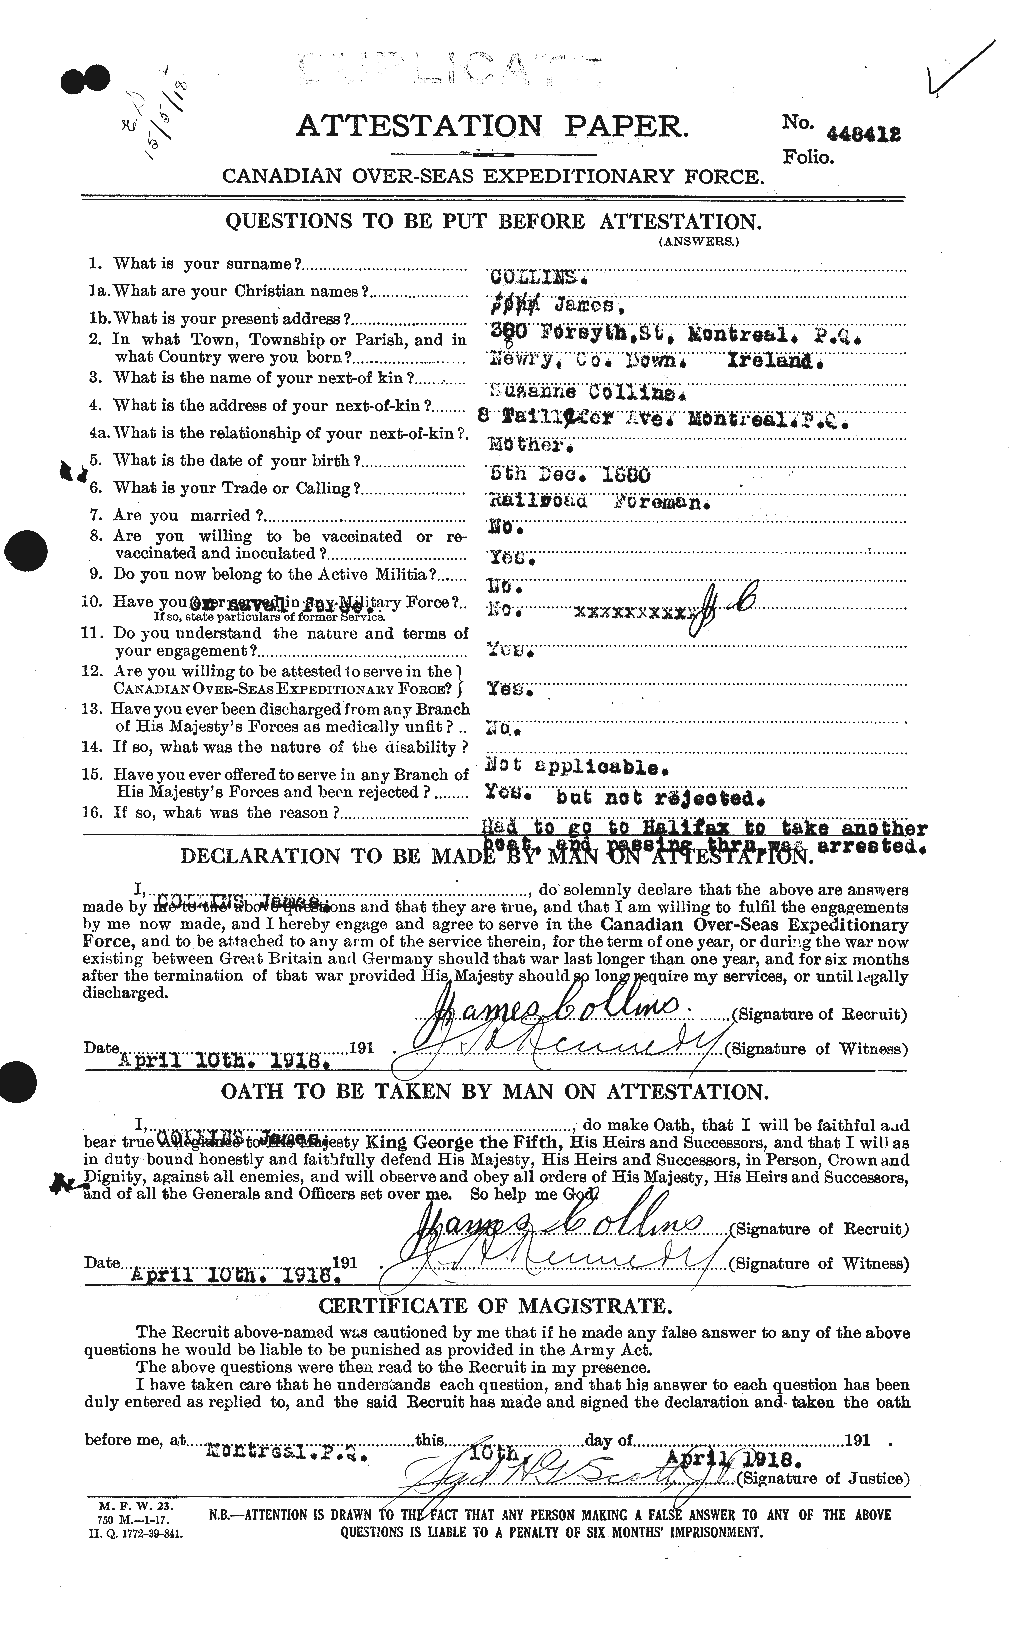 Personnel Records of the First World War - CEF 069980a